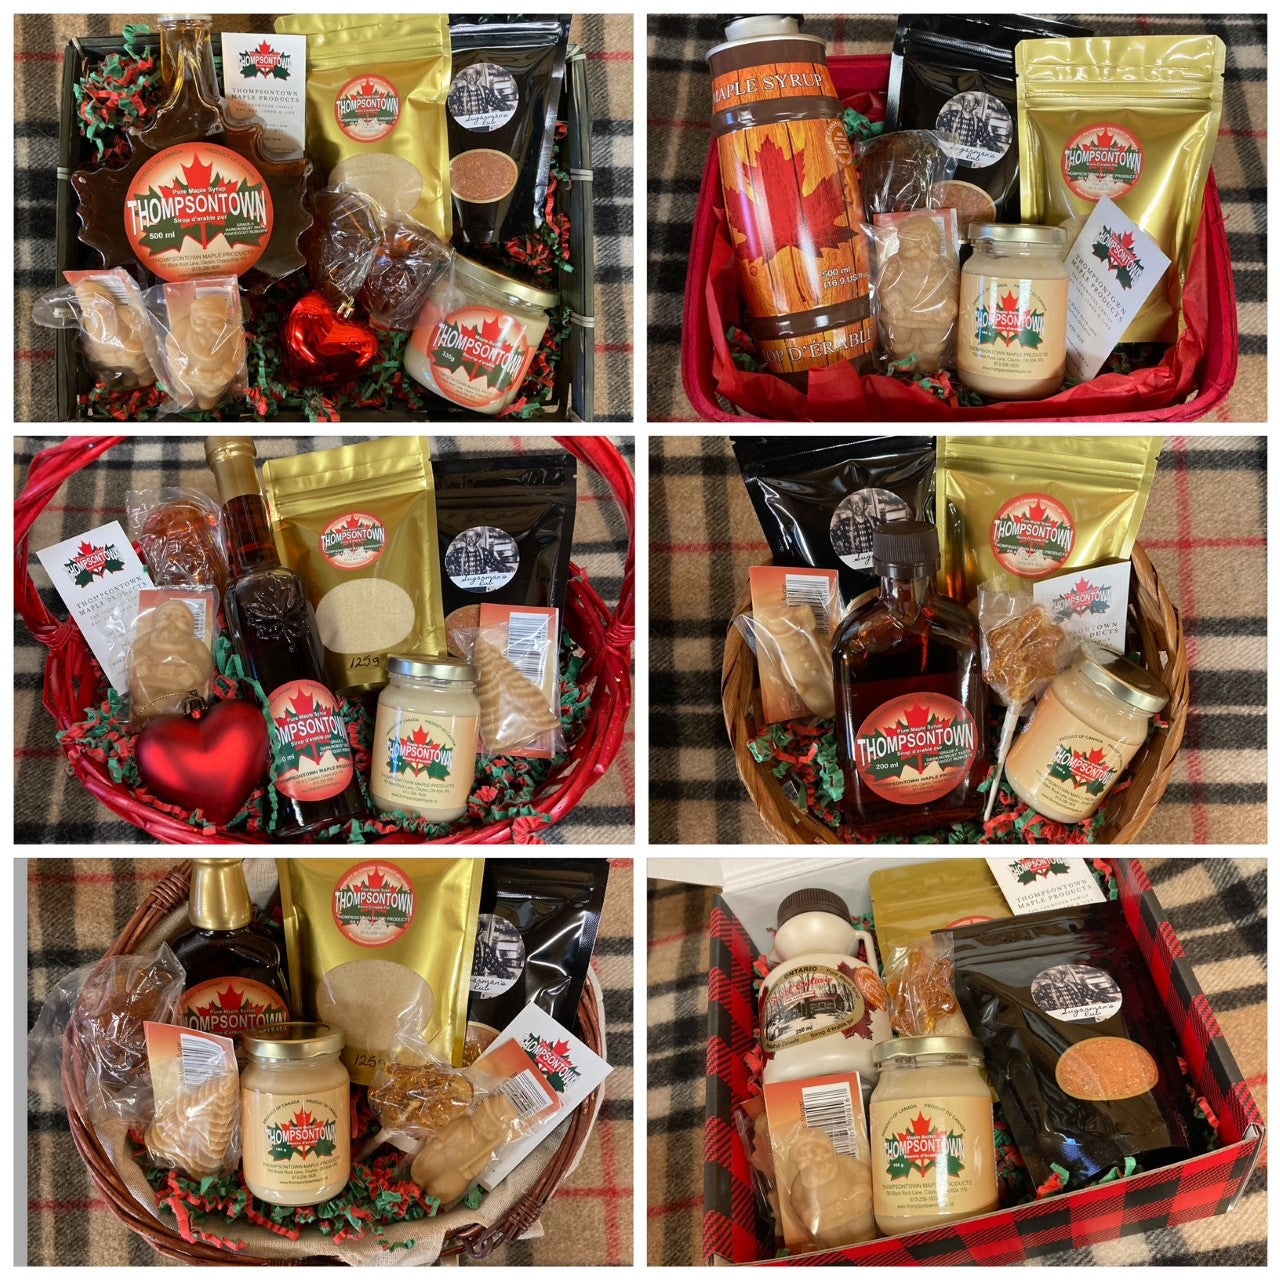 Maple Gift Baskets (Local only)-Product of Ontario Canada